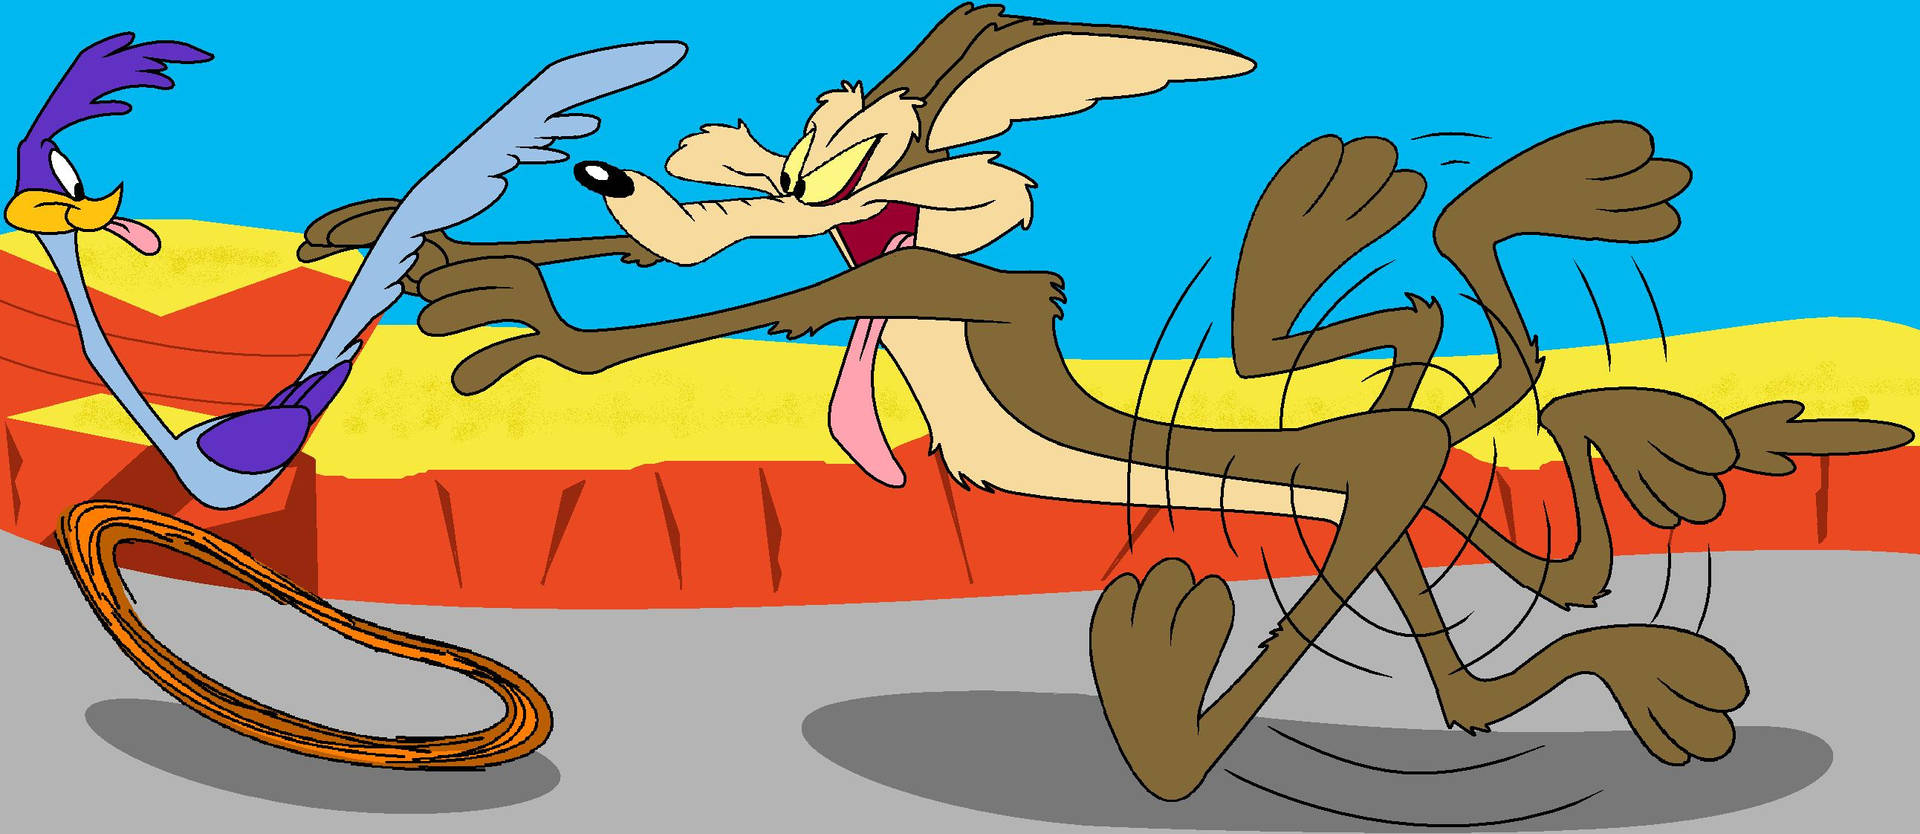 Wile E Coyote Road Runner